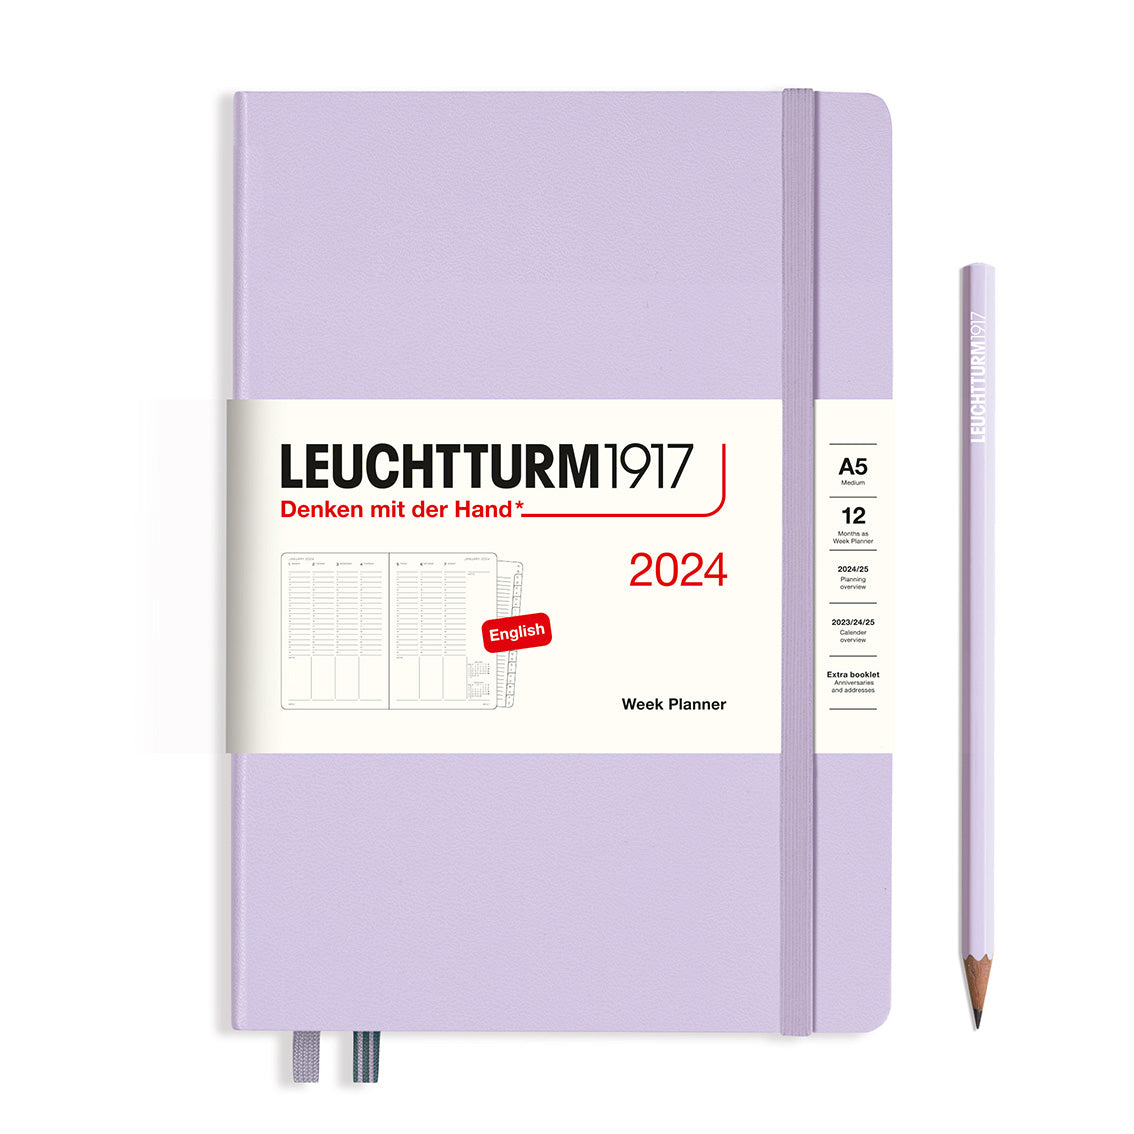 An image of a lilac planner with a lilac elastic band holding it together and a cream paper wrap around the middle stating the business name Leuchtturm1917, that it is for the year 2024, it is a week planner, is A5 in size and an English language version. It has an image on the wrap showing the inside layout which is a week across 2 pages set out as appointments. A lilac pencil is shown at the side of the planner.